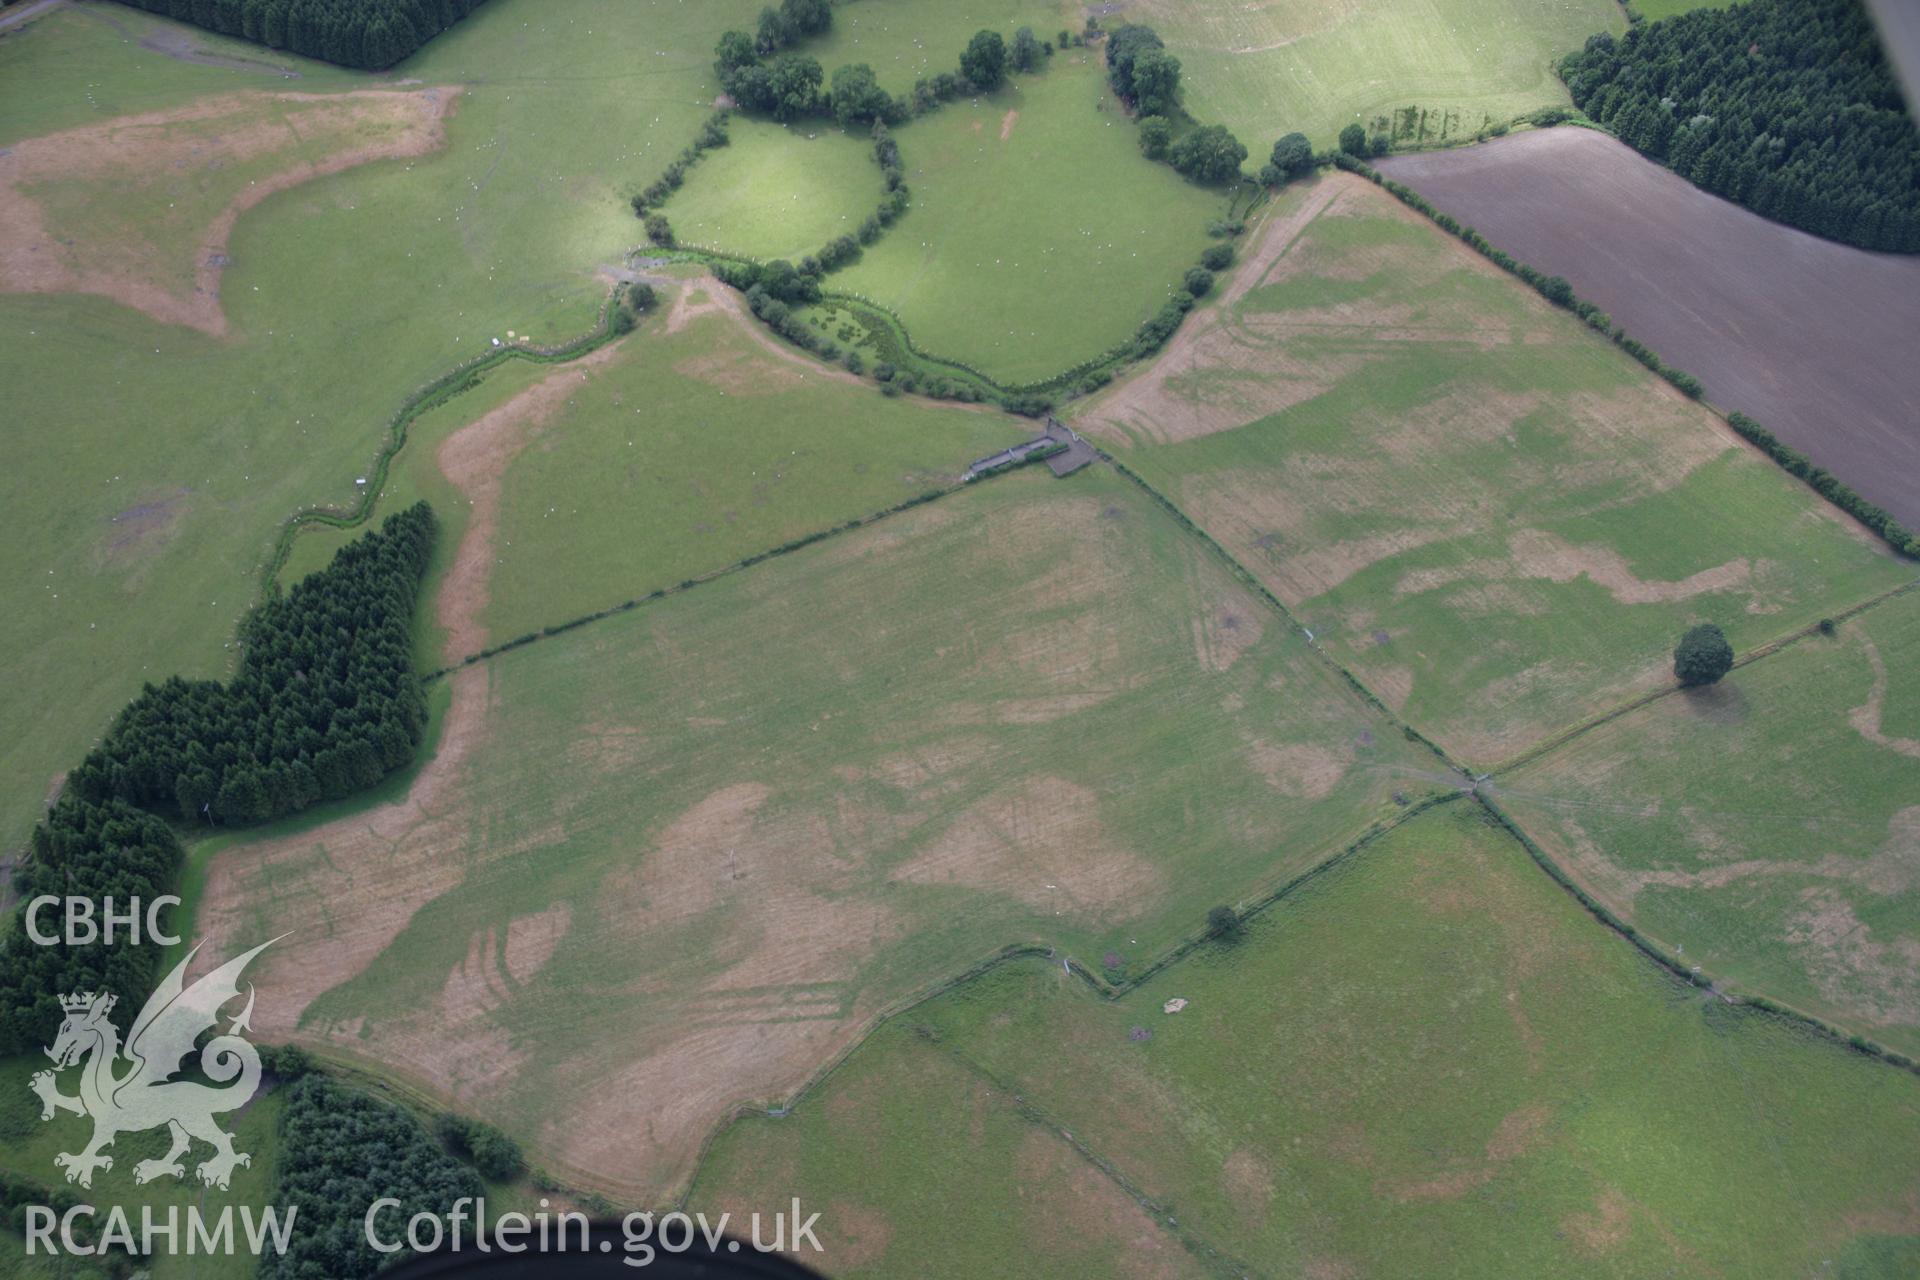 RCAHMW colour oblique aerial photograph of Llanfor Roman Military Complex visible in cropmarks, in general view from the east. Taken on 31 July 2006 by Toby Driver.